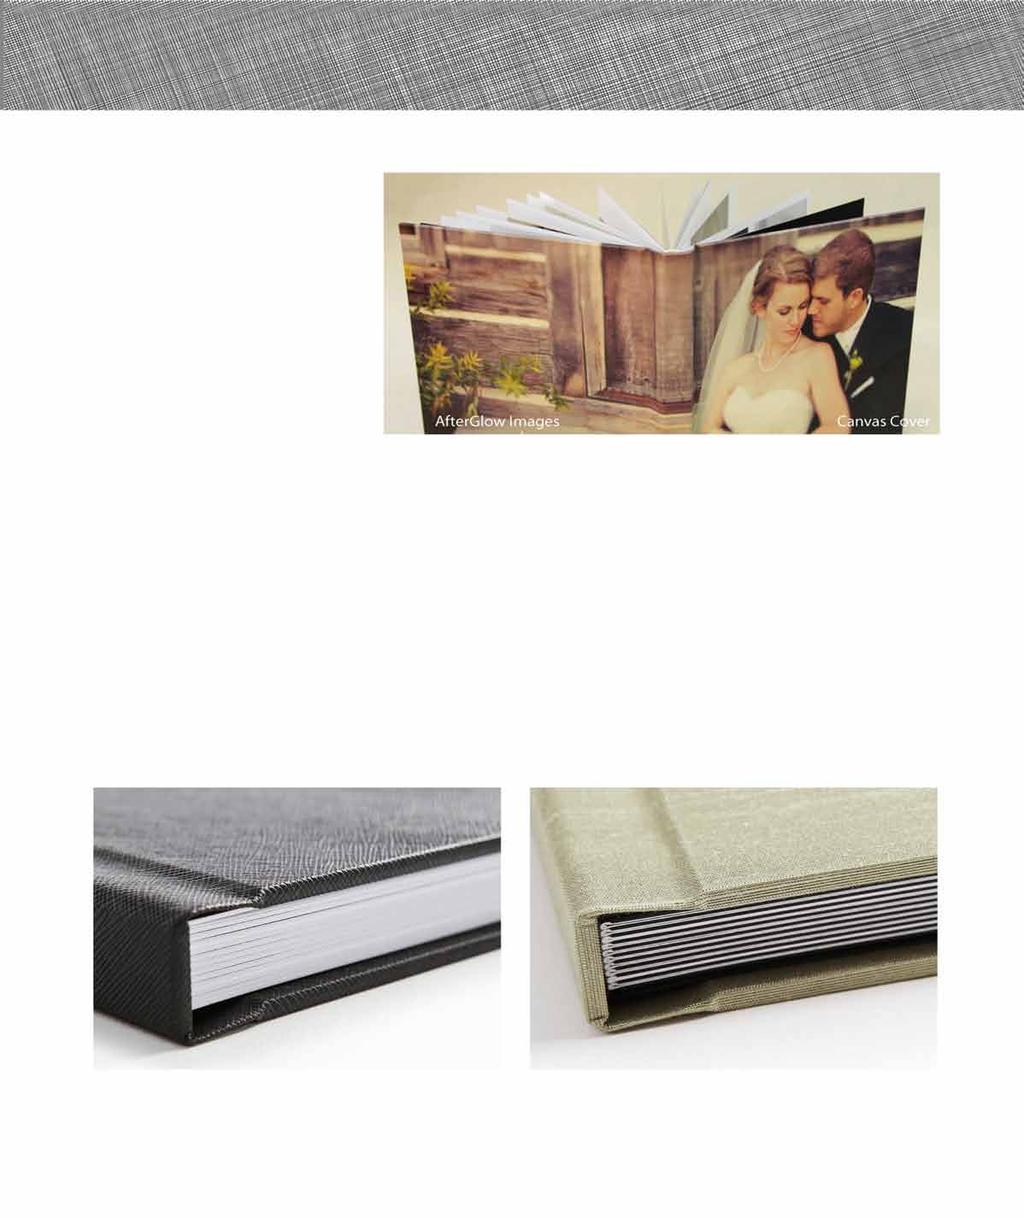 Renzo Flushmount Albums offer a wide variety of cover and page options to allow for truly unique combinations to suit any budget and style.